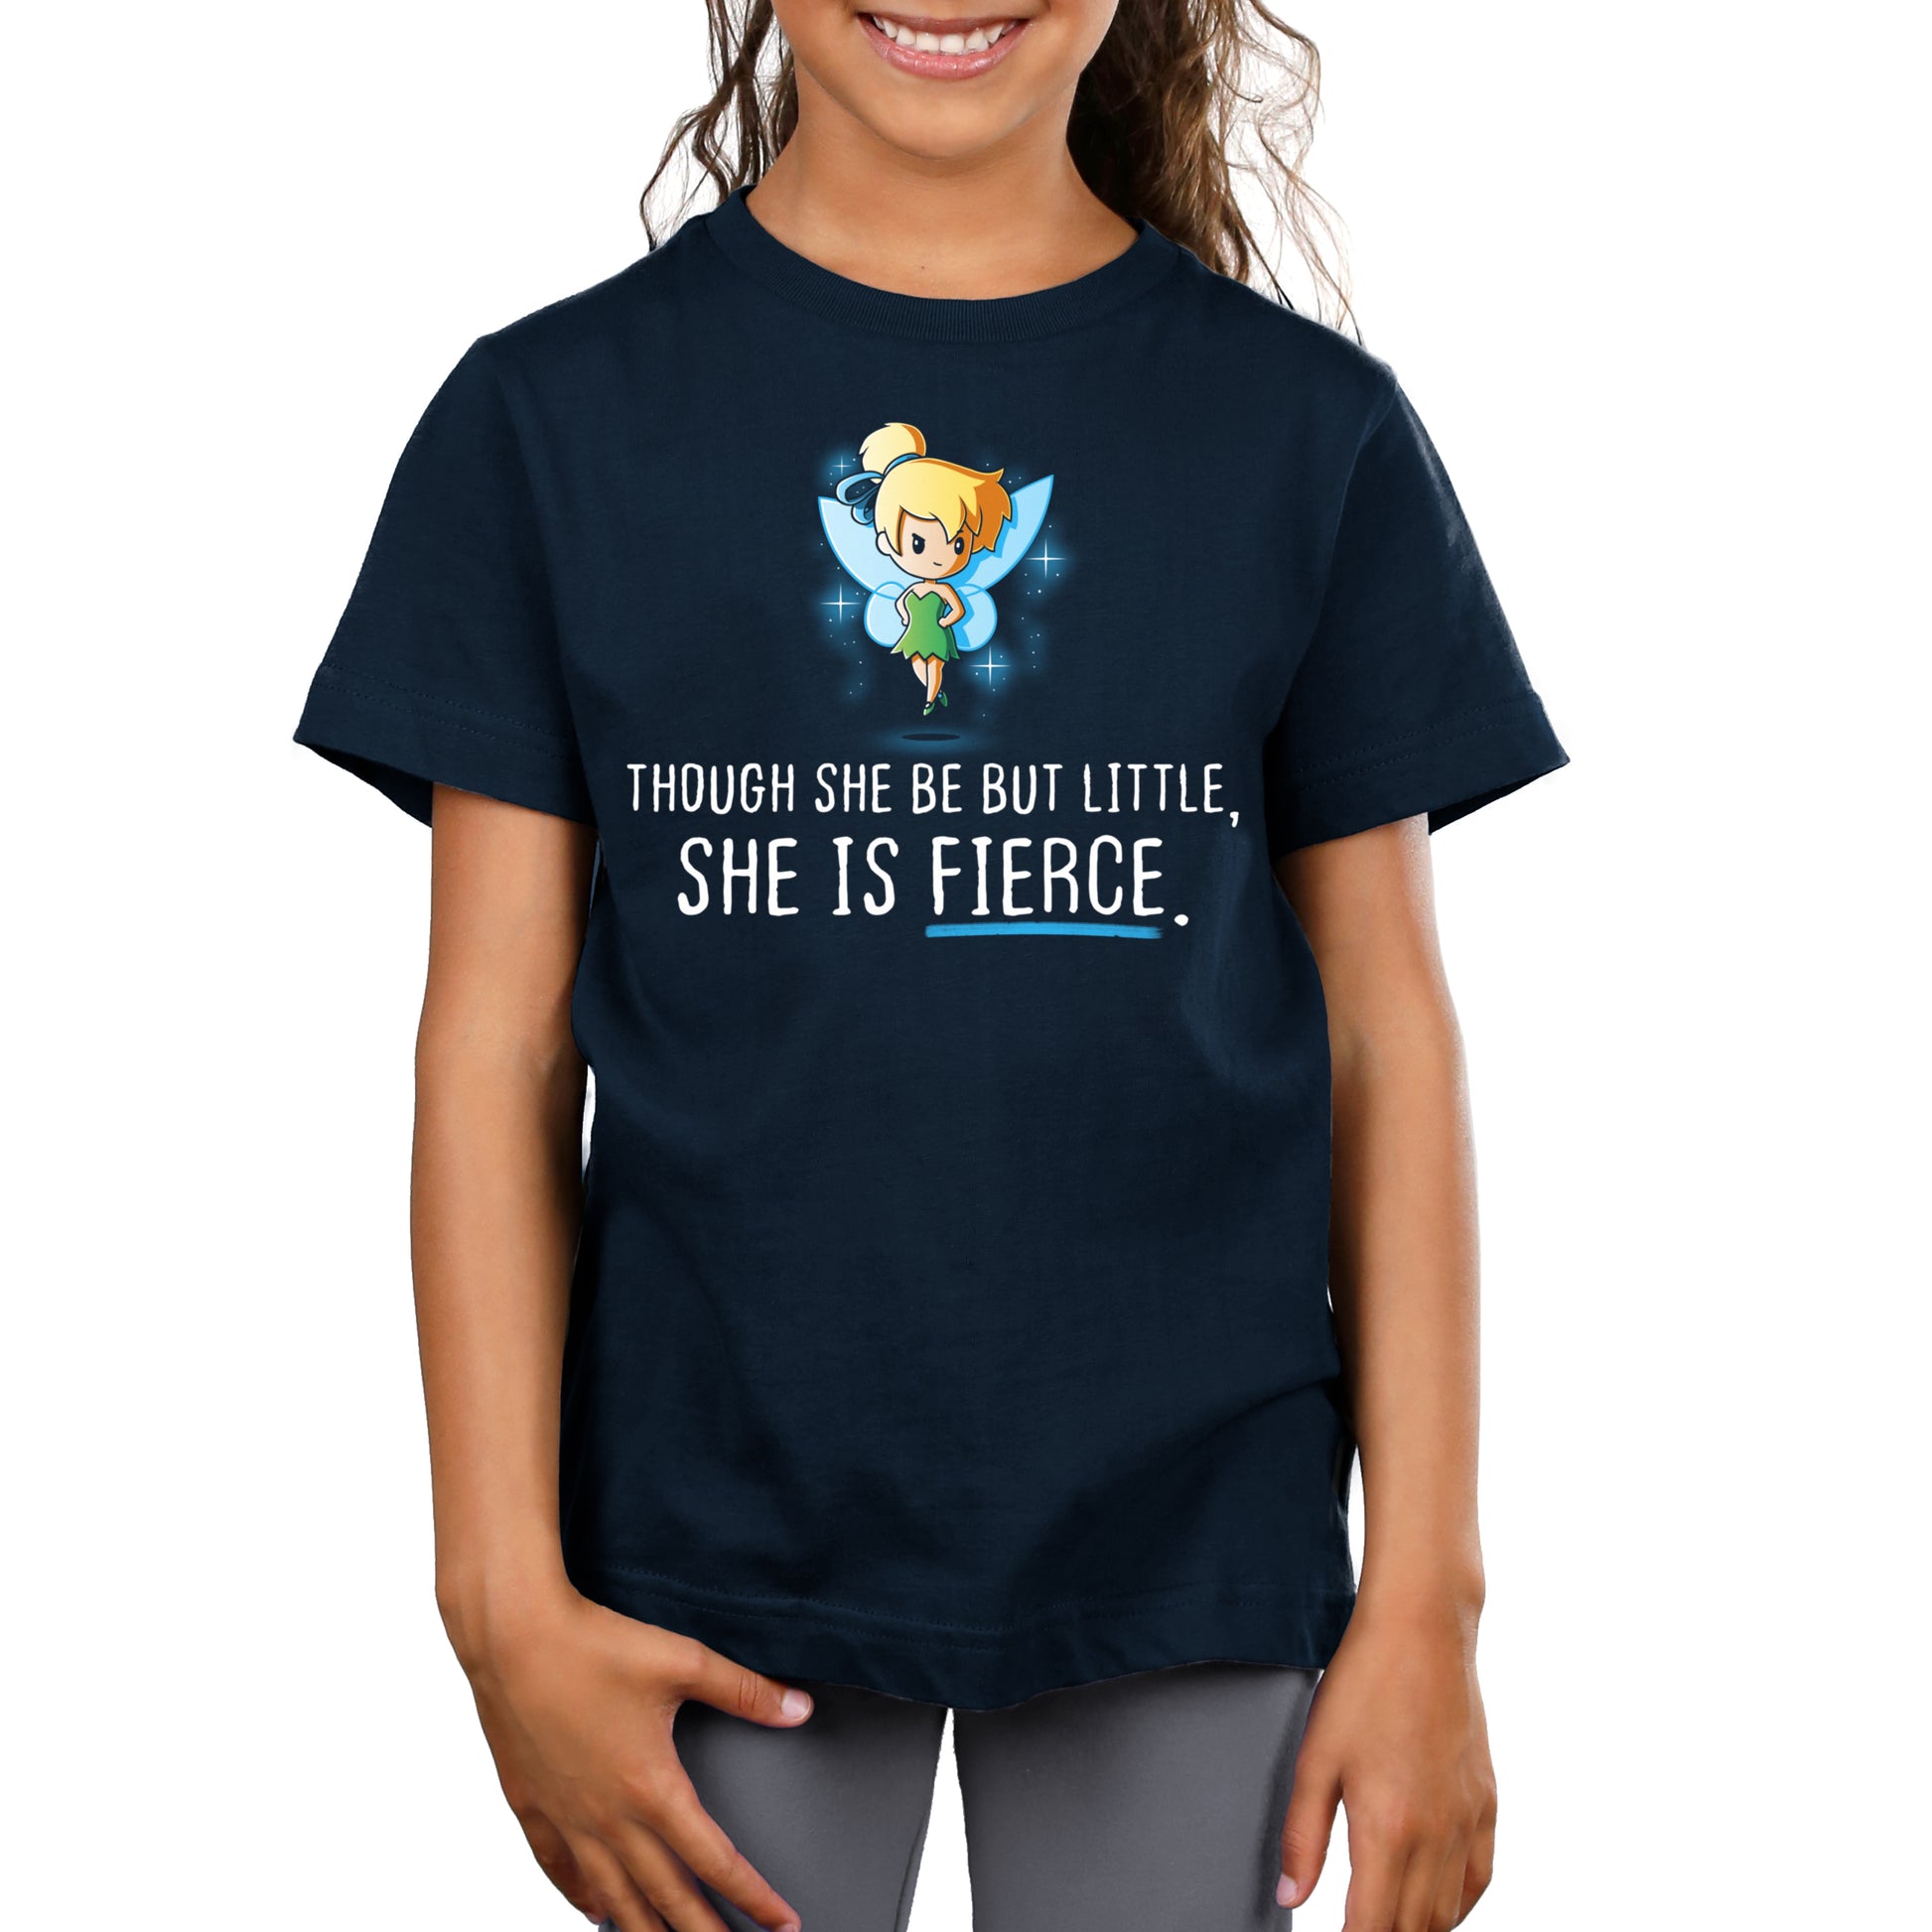 A girl wearing a licensed Disney Navy Blue Tinker Bell t-shirt in the "She is Fierce" design.